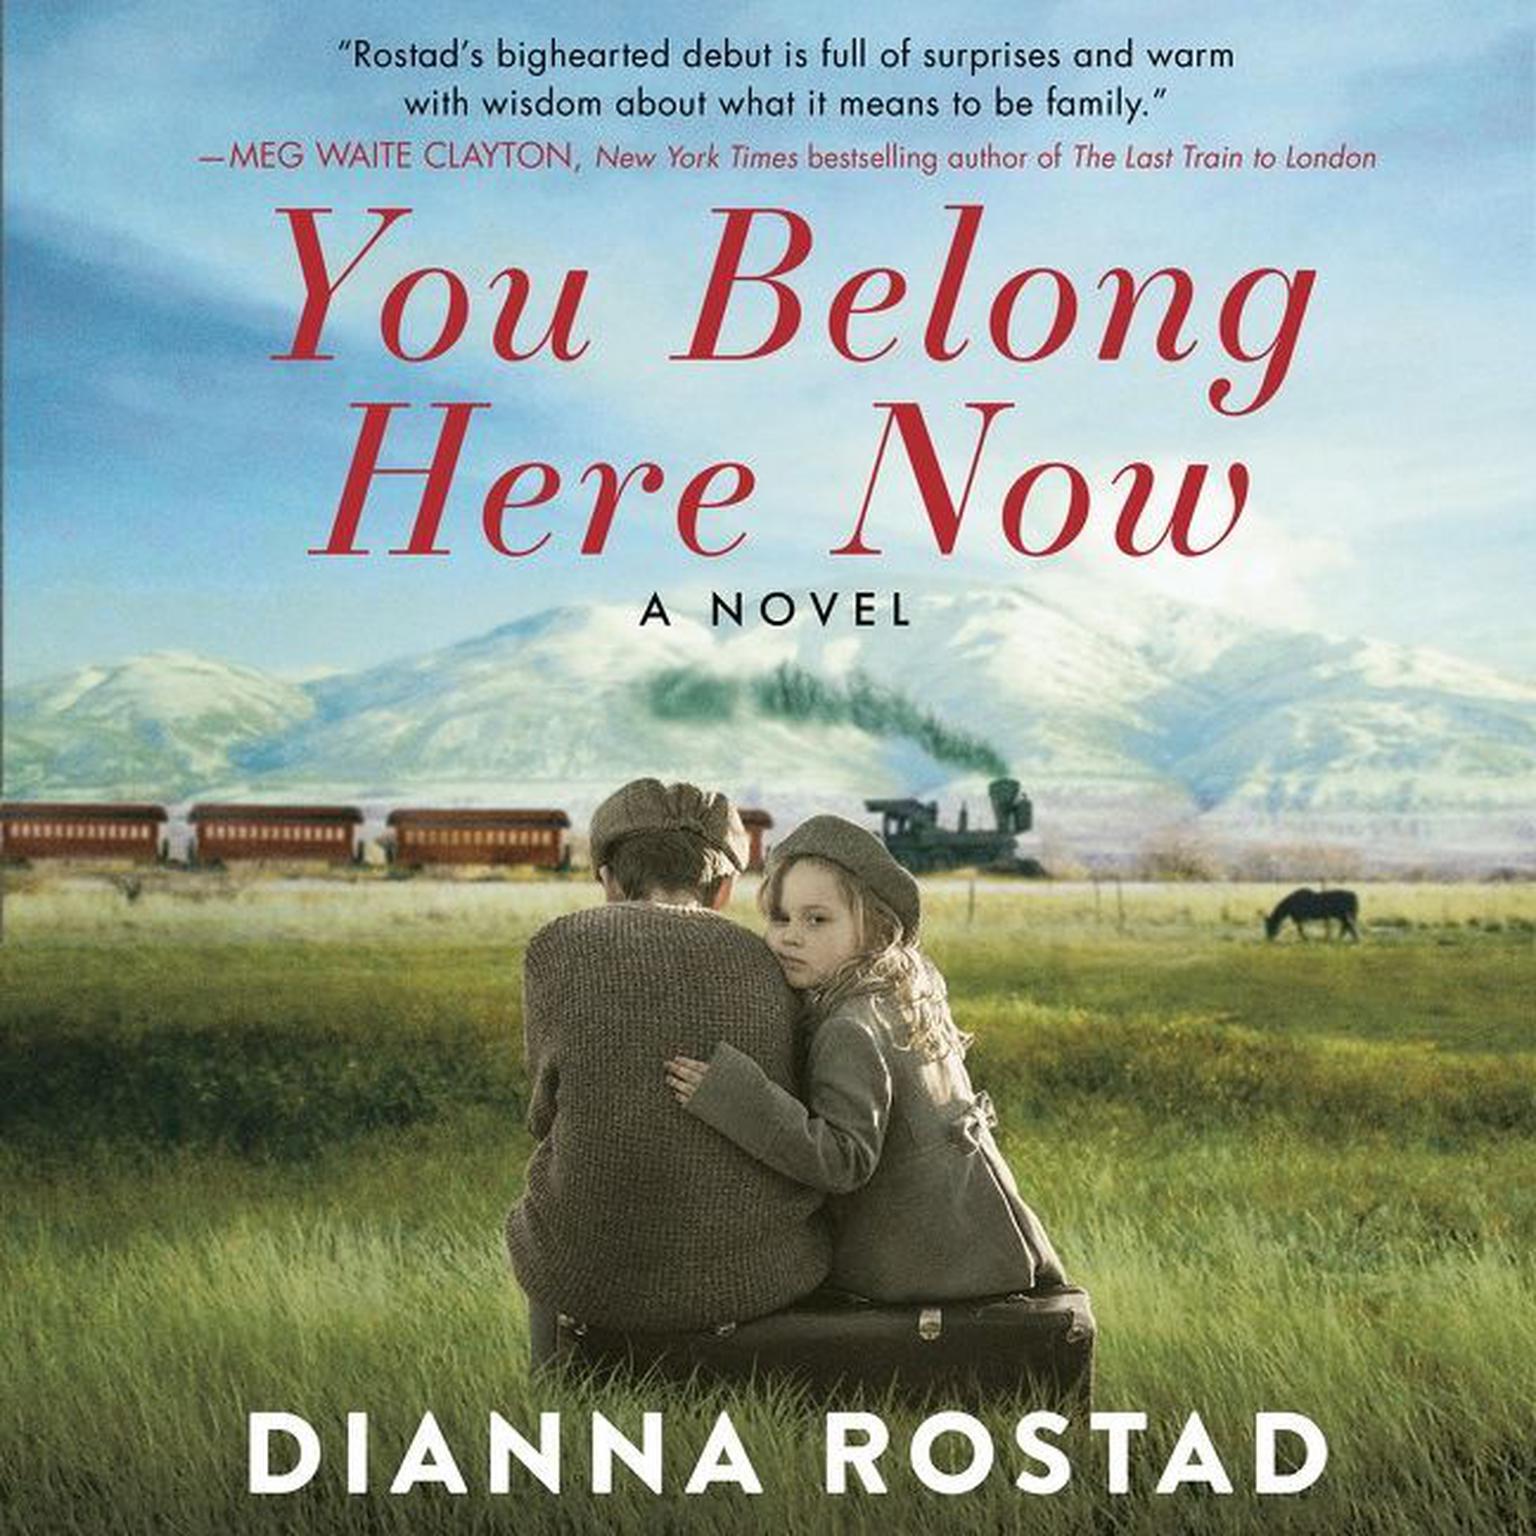 You Belong Here Now: A Novel Audiobook, by Dianna Rostad